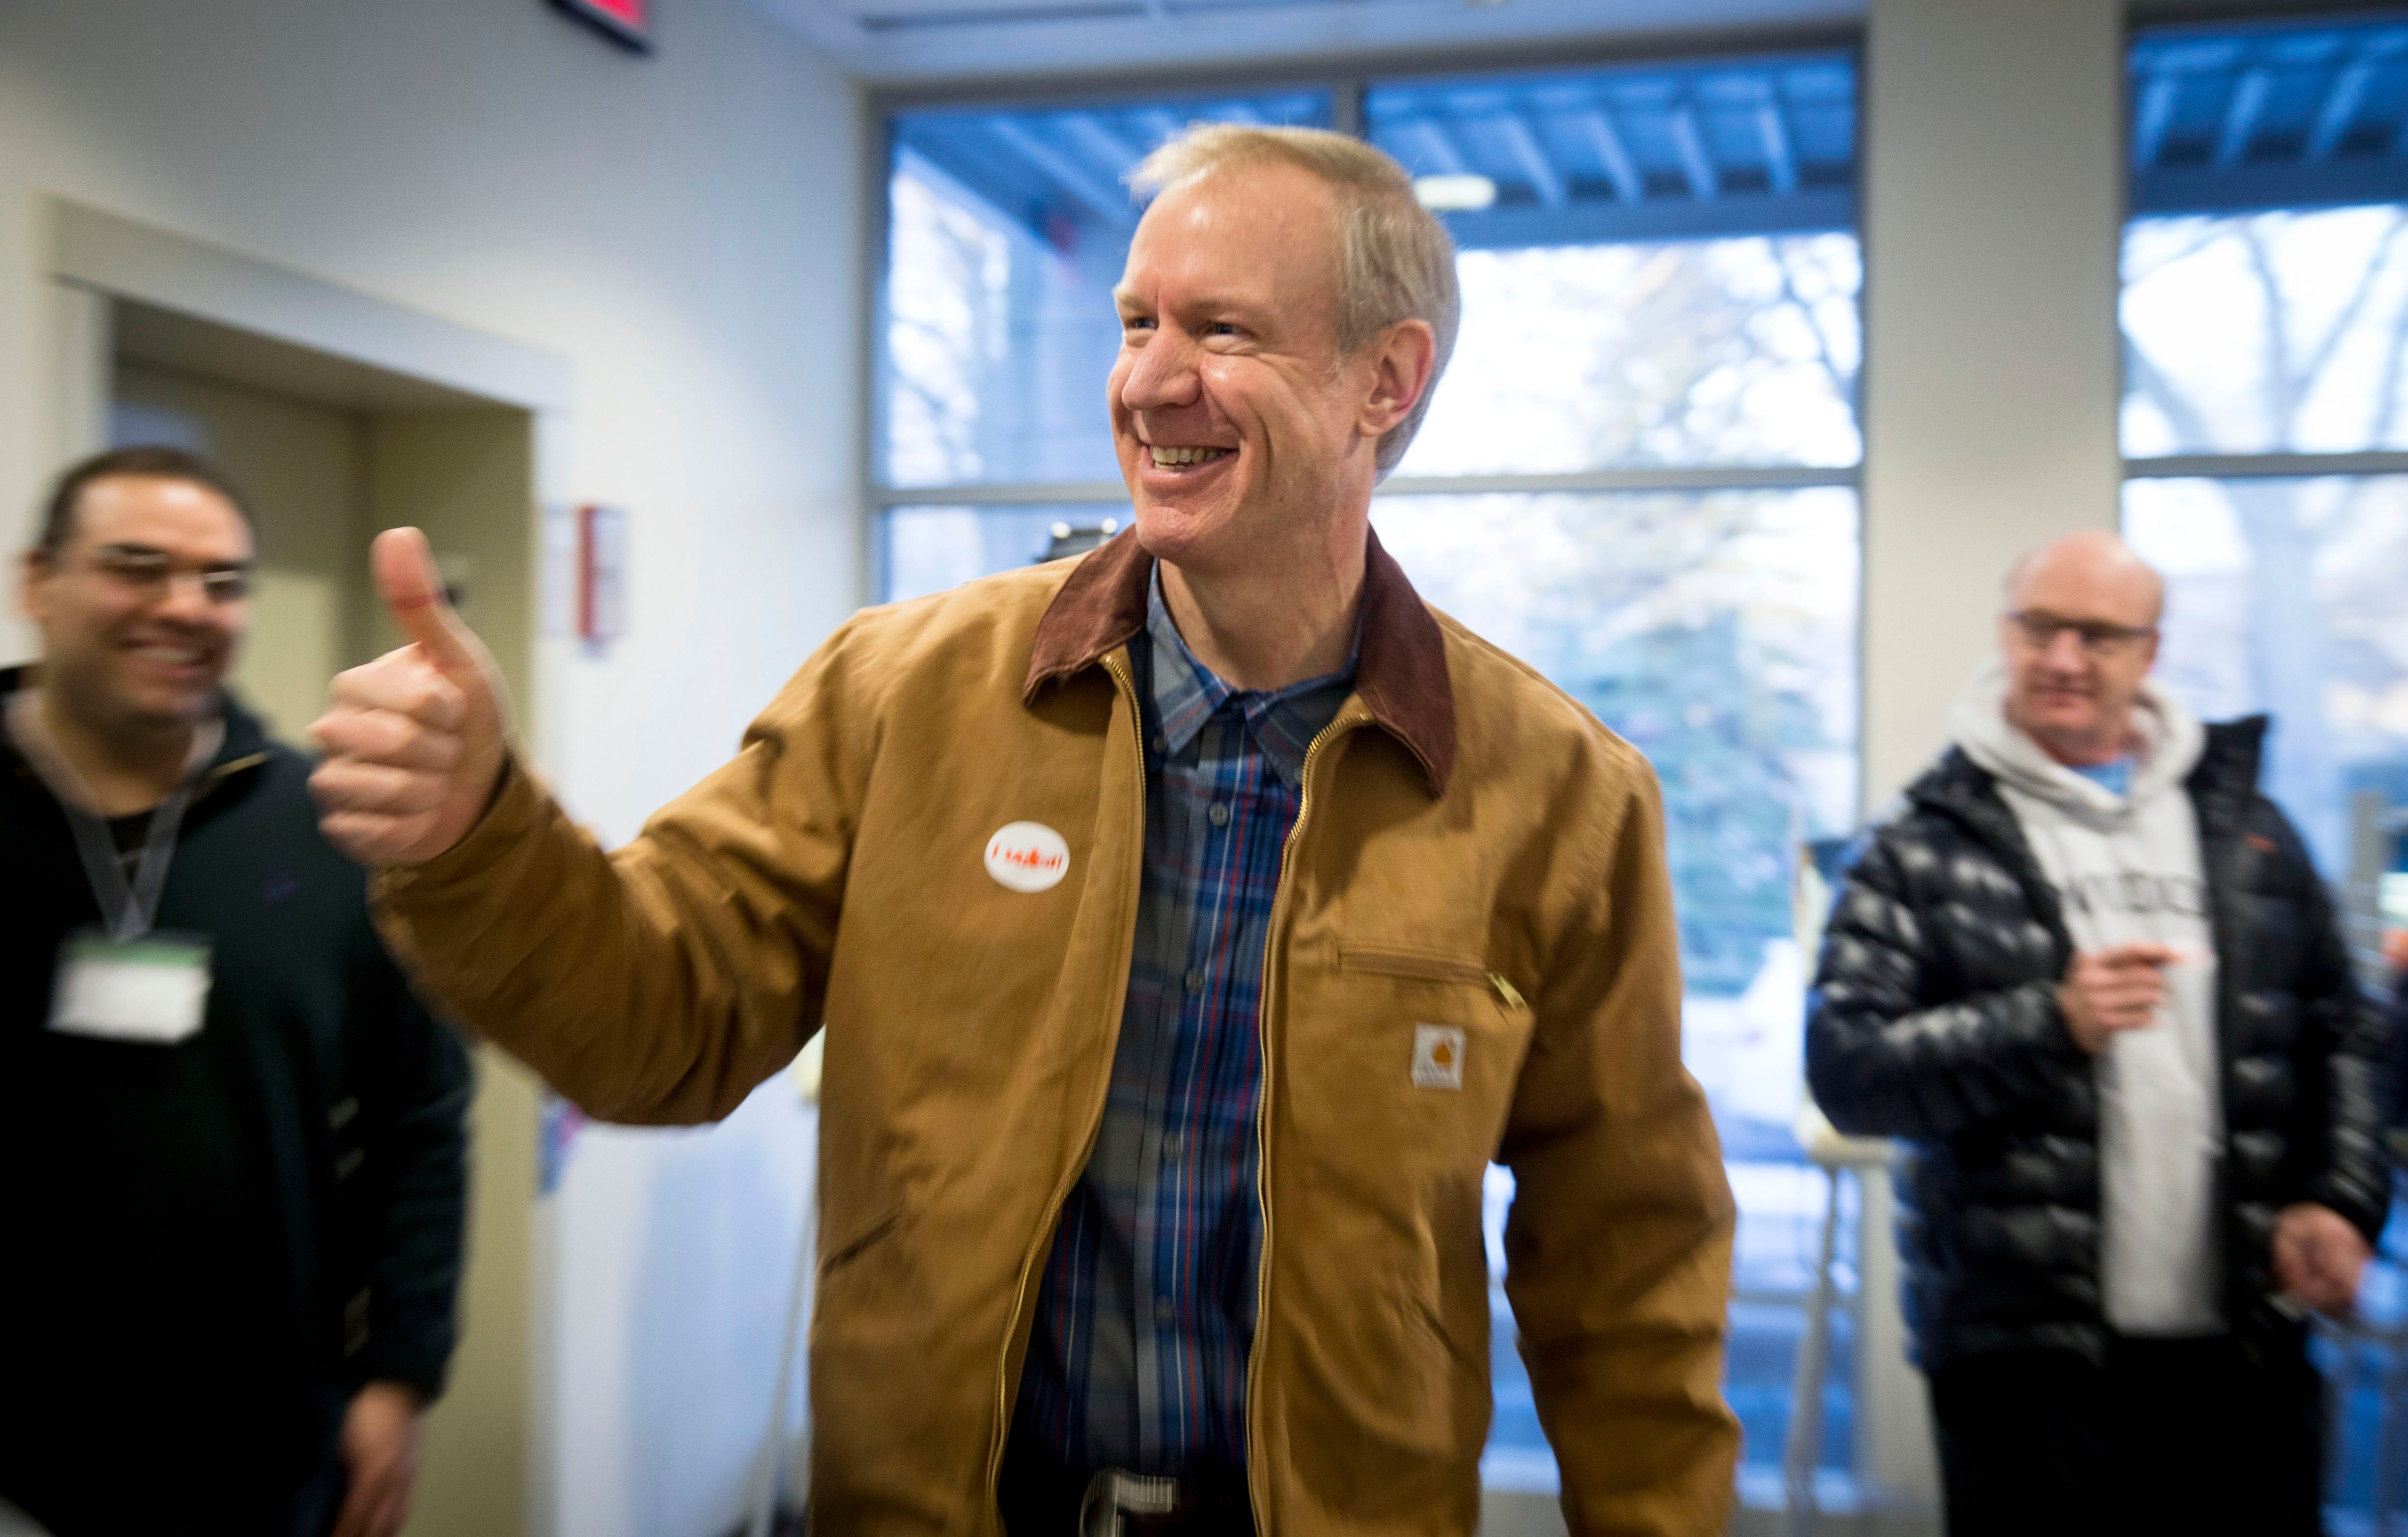 Illinois Republican gubernatorial candidate Bruce Rauner exits the polling place after voting in Winnetka, Ill., March 18, 2014. (Andrew Nelles&mdash;AP)